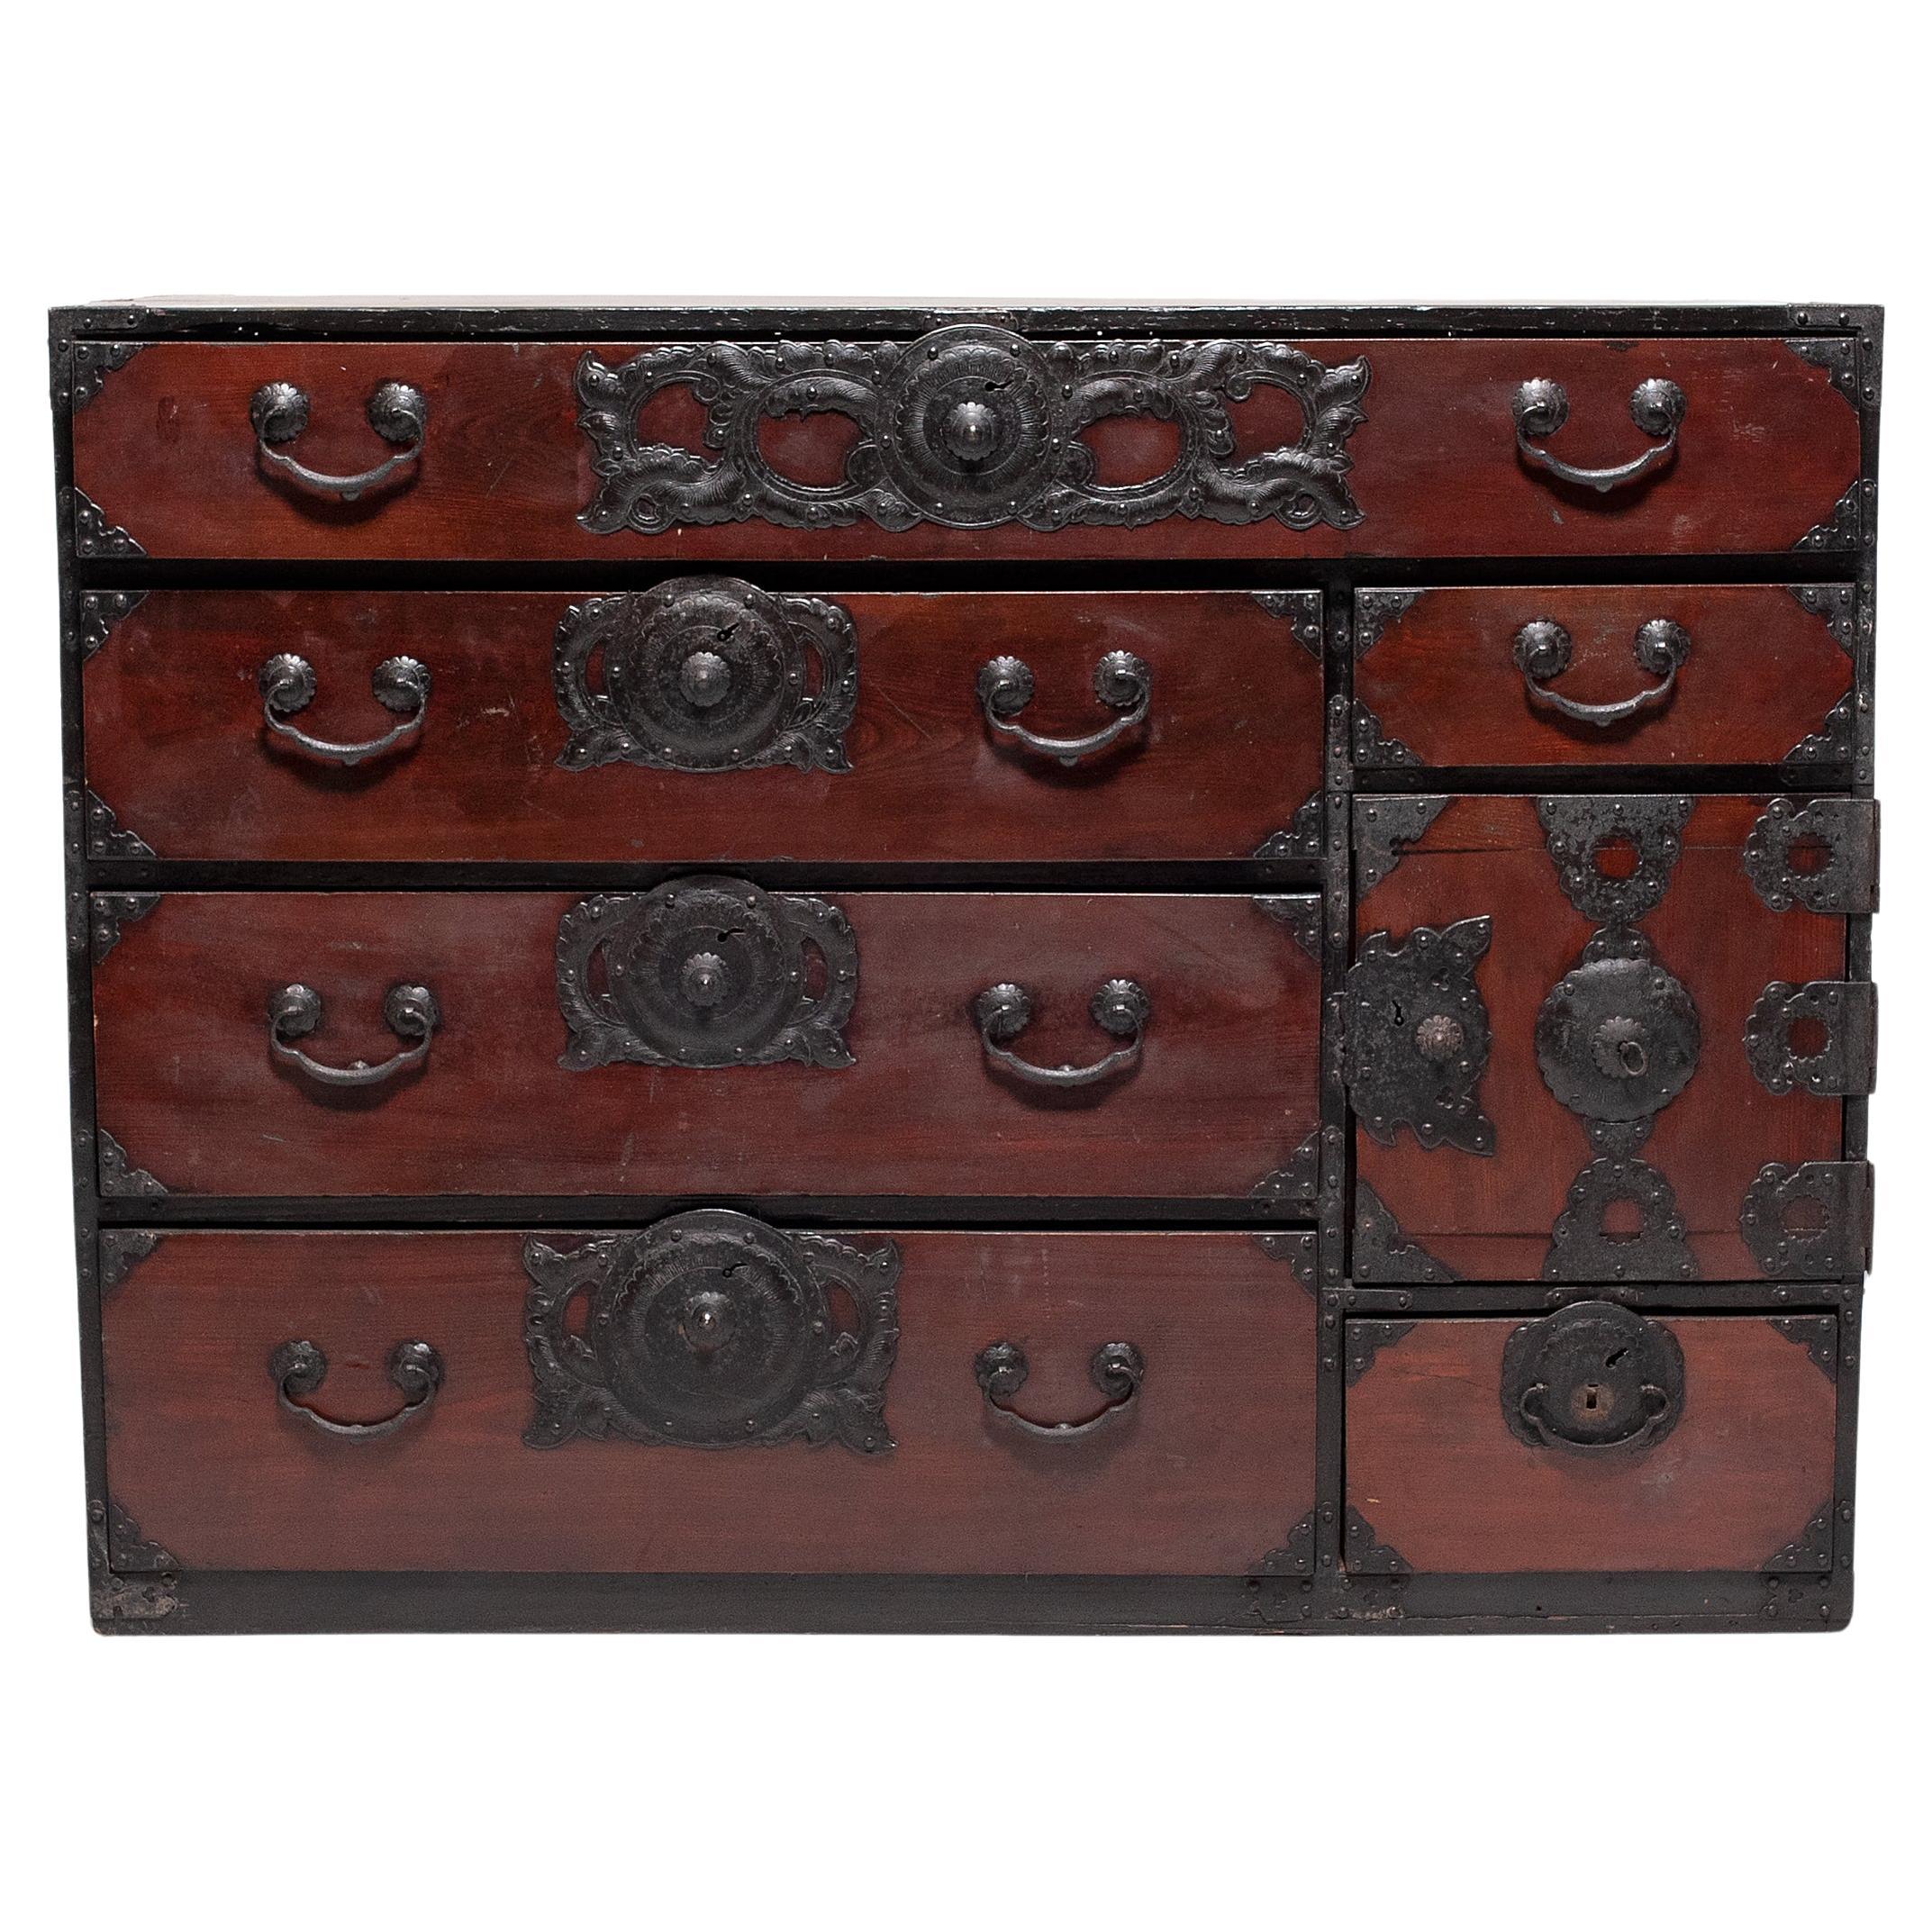 Japanese Sendai Tansu Chest with Floral Iron Hardware, C. 1900